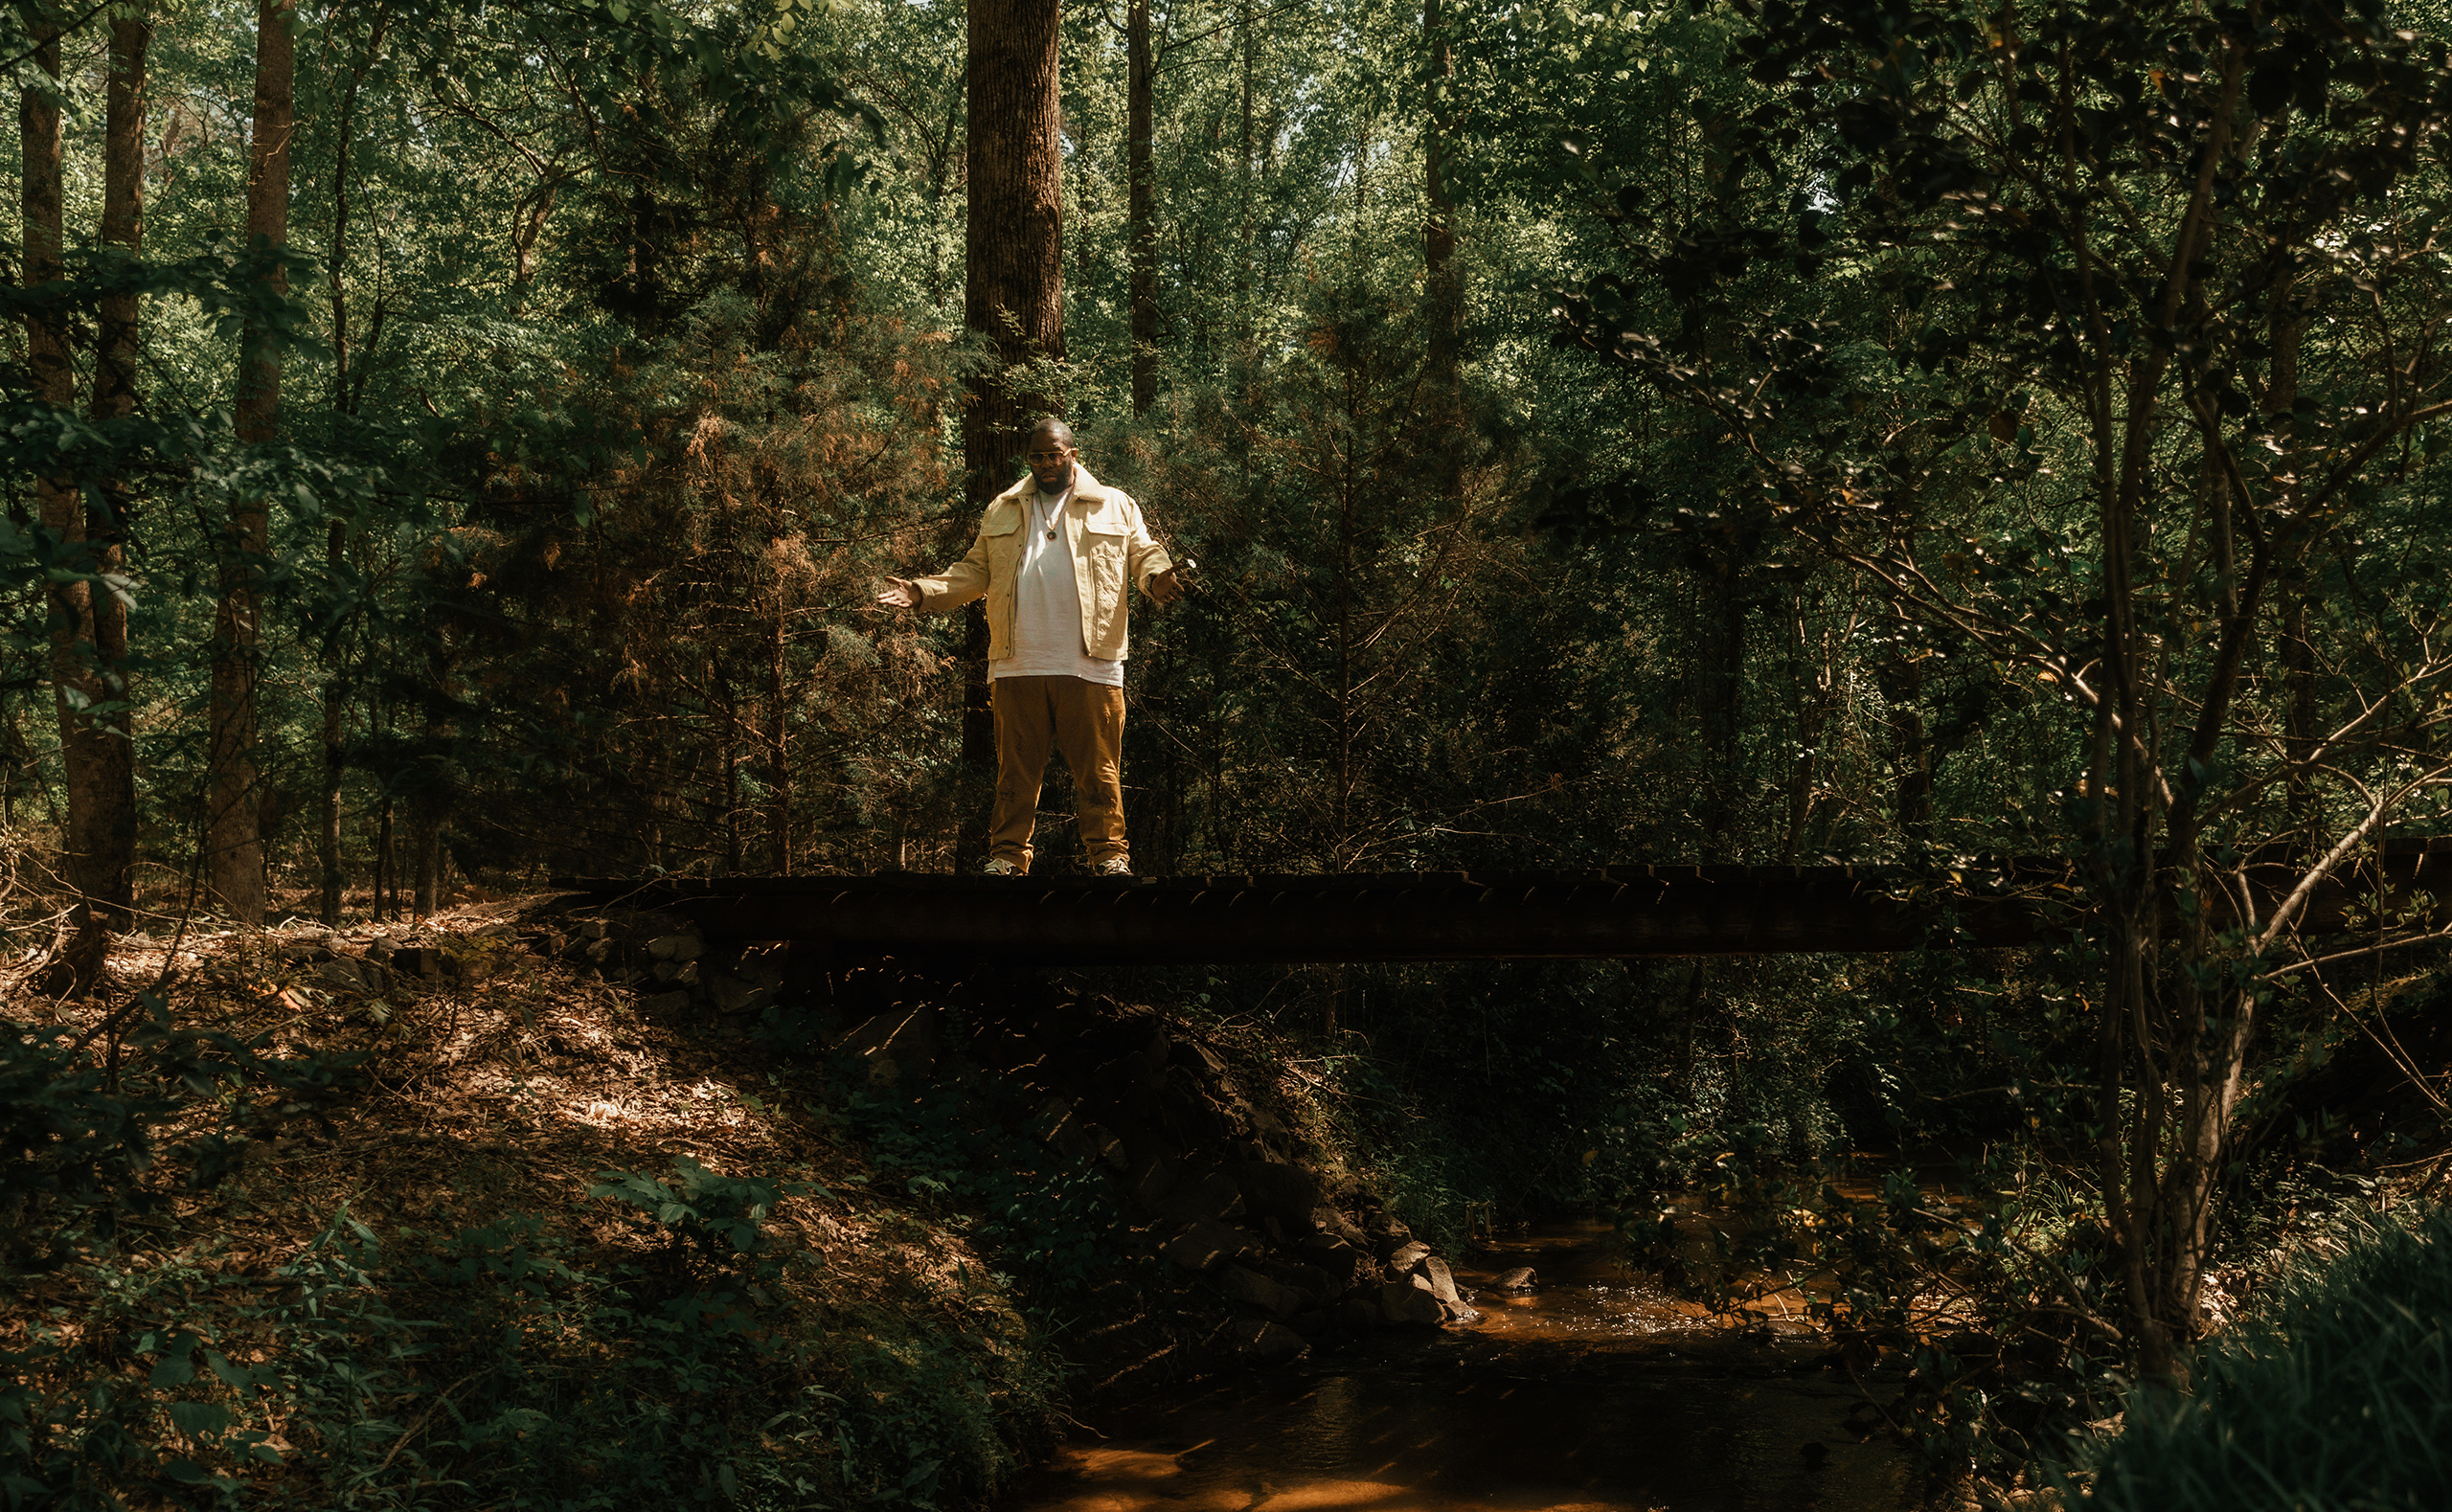 Killer Mike stands on a wooden bridge over a stream in the woods